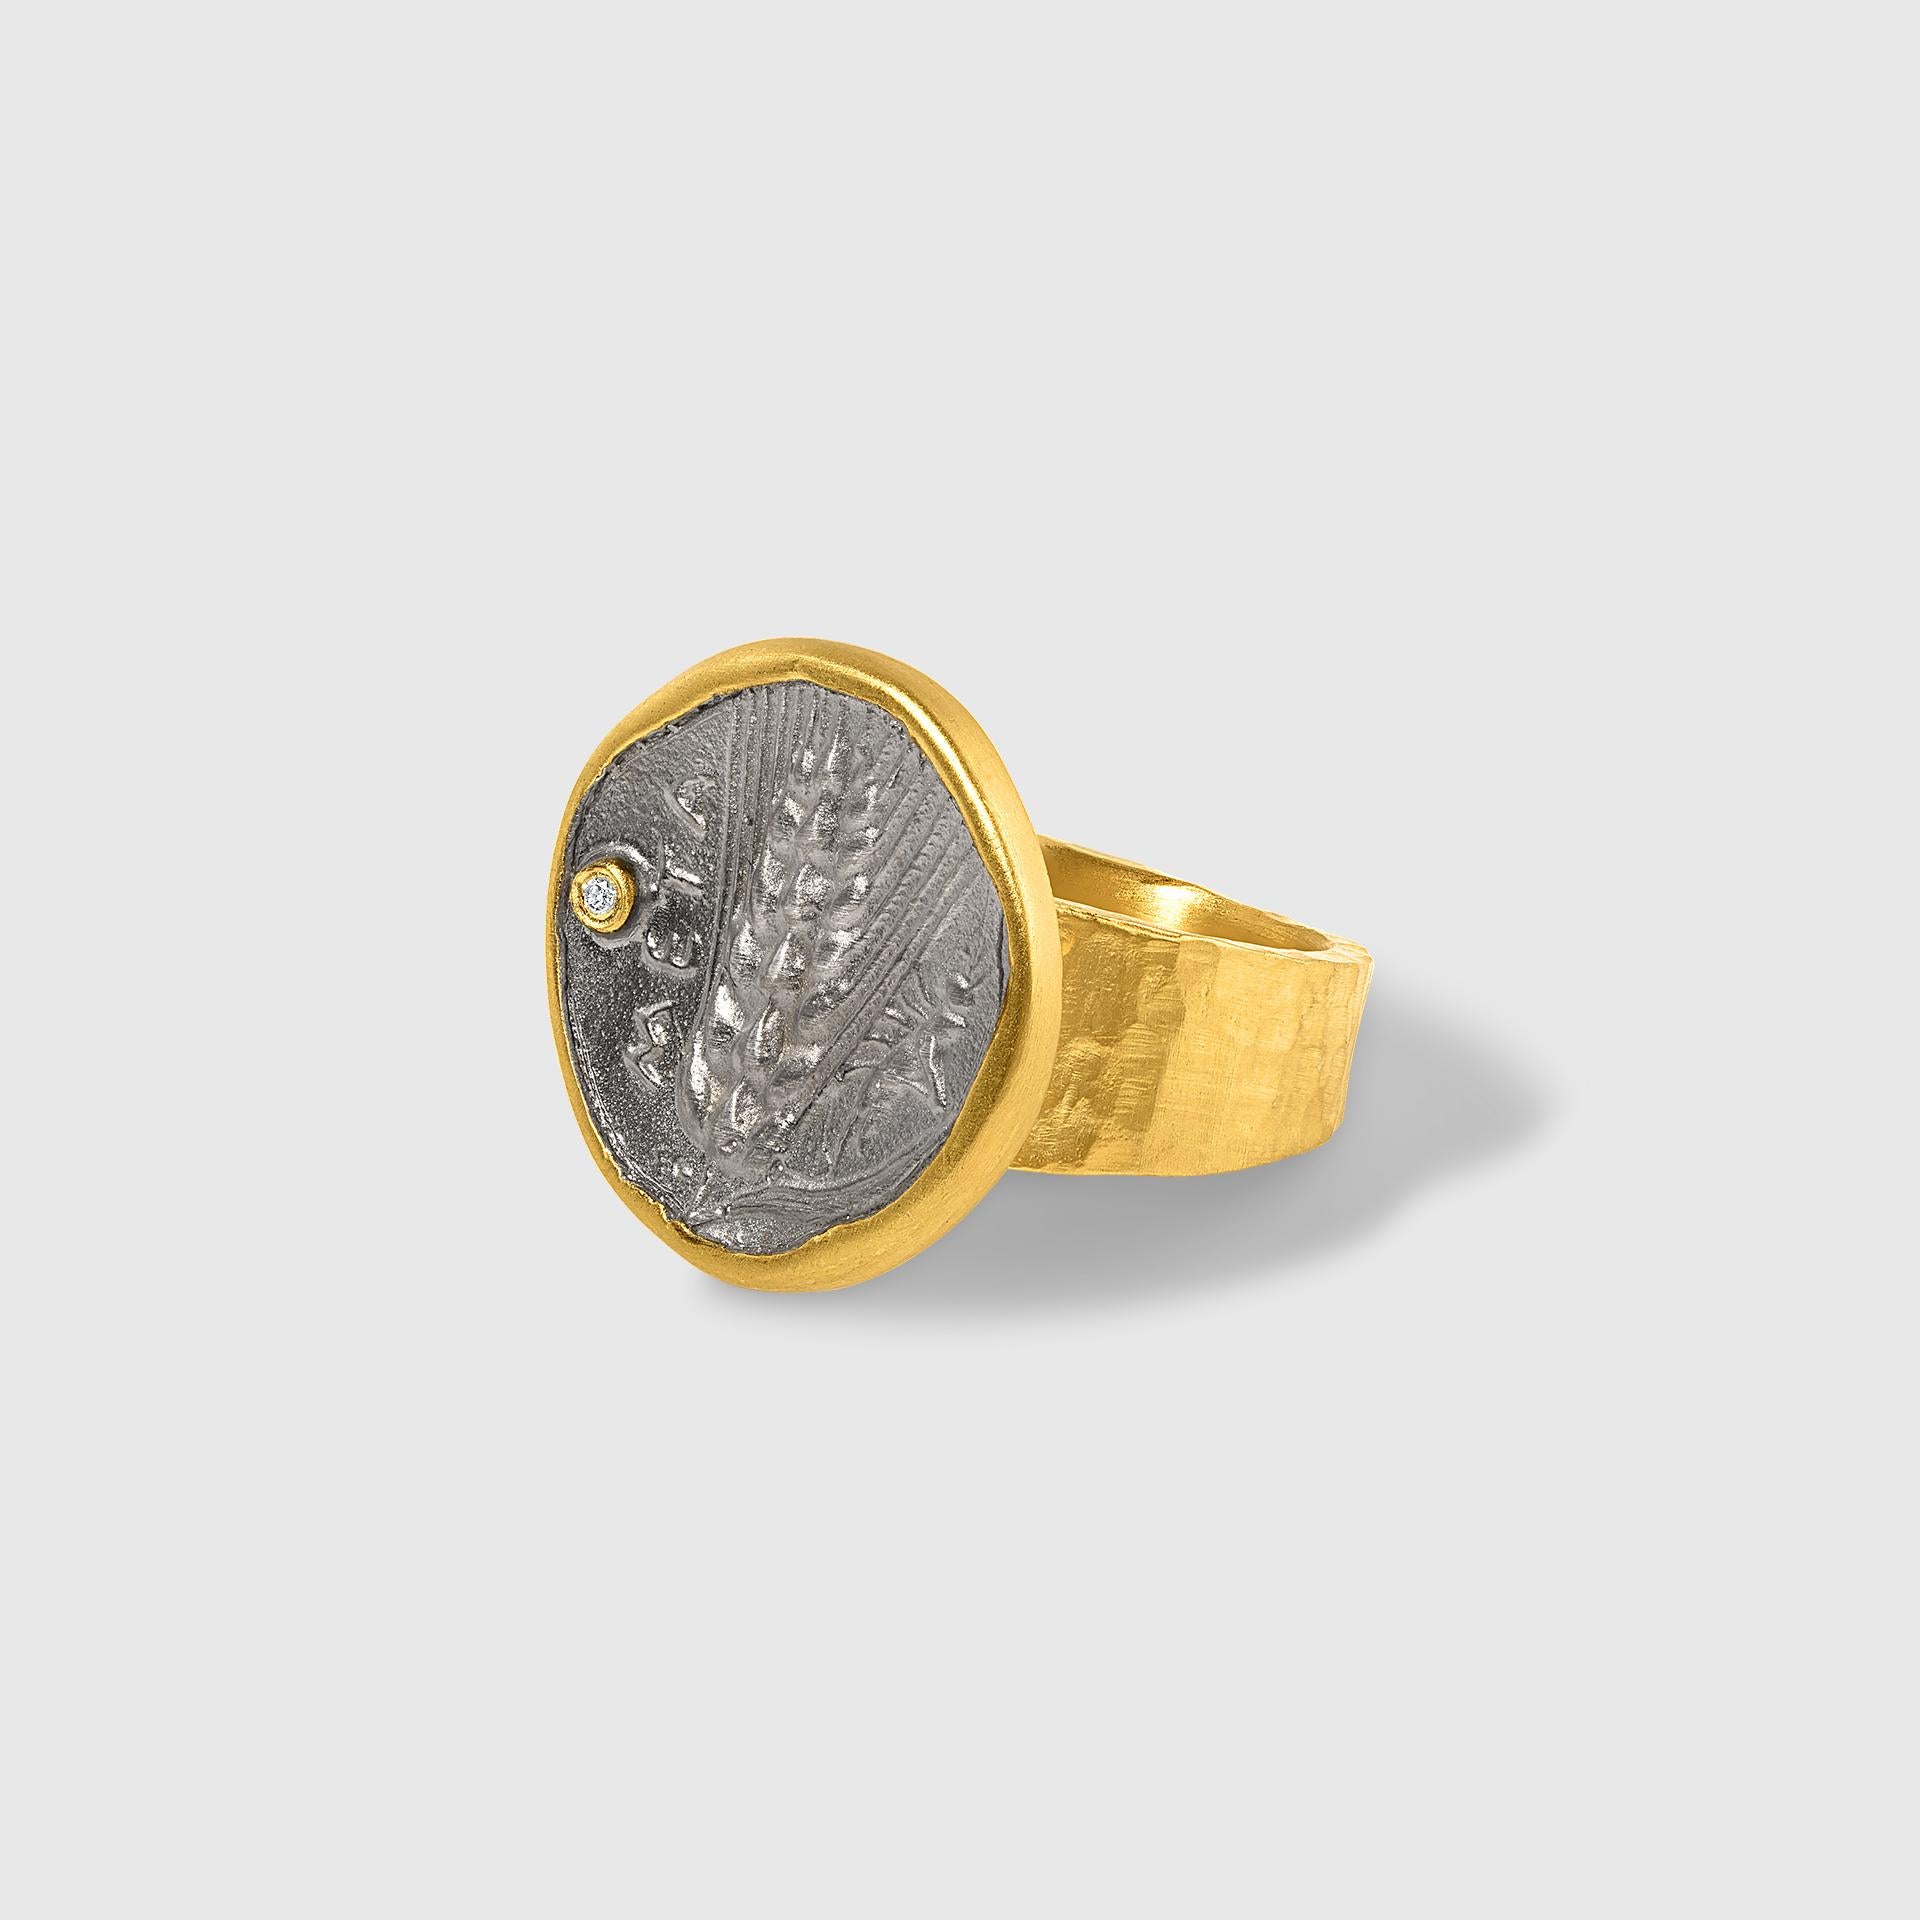 Byzantine Ancient Wheat Coin Replica Ring with Diamond 24 Karat Gold & Silver by Kurtulan For Sale